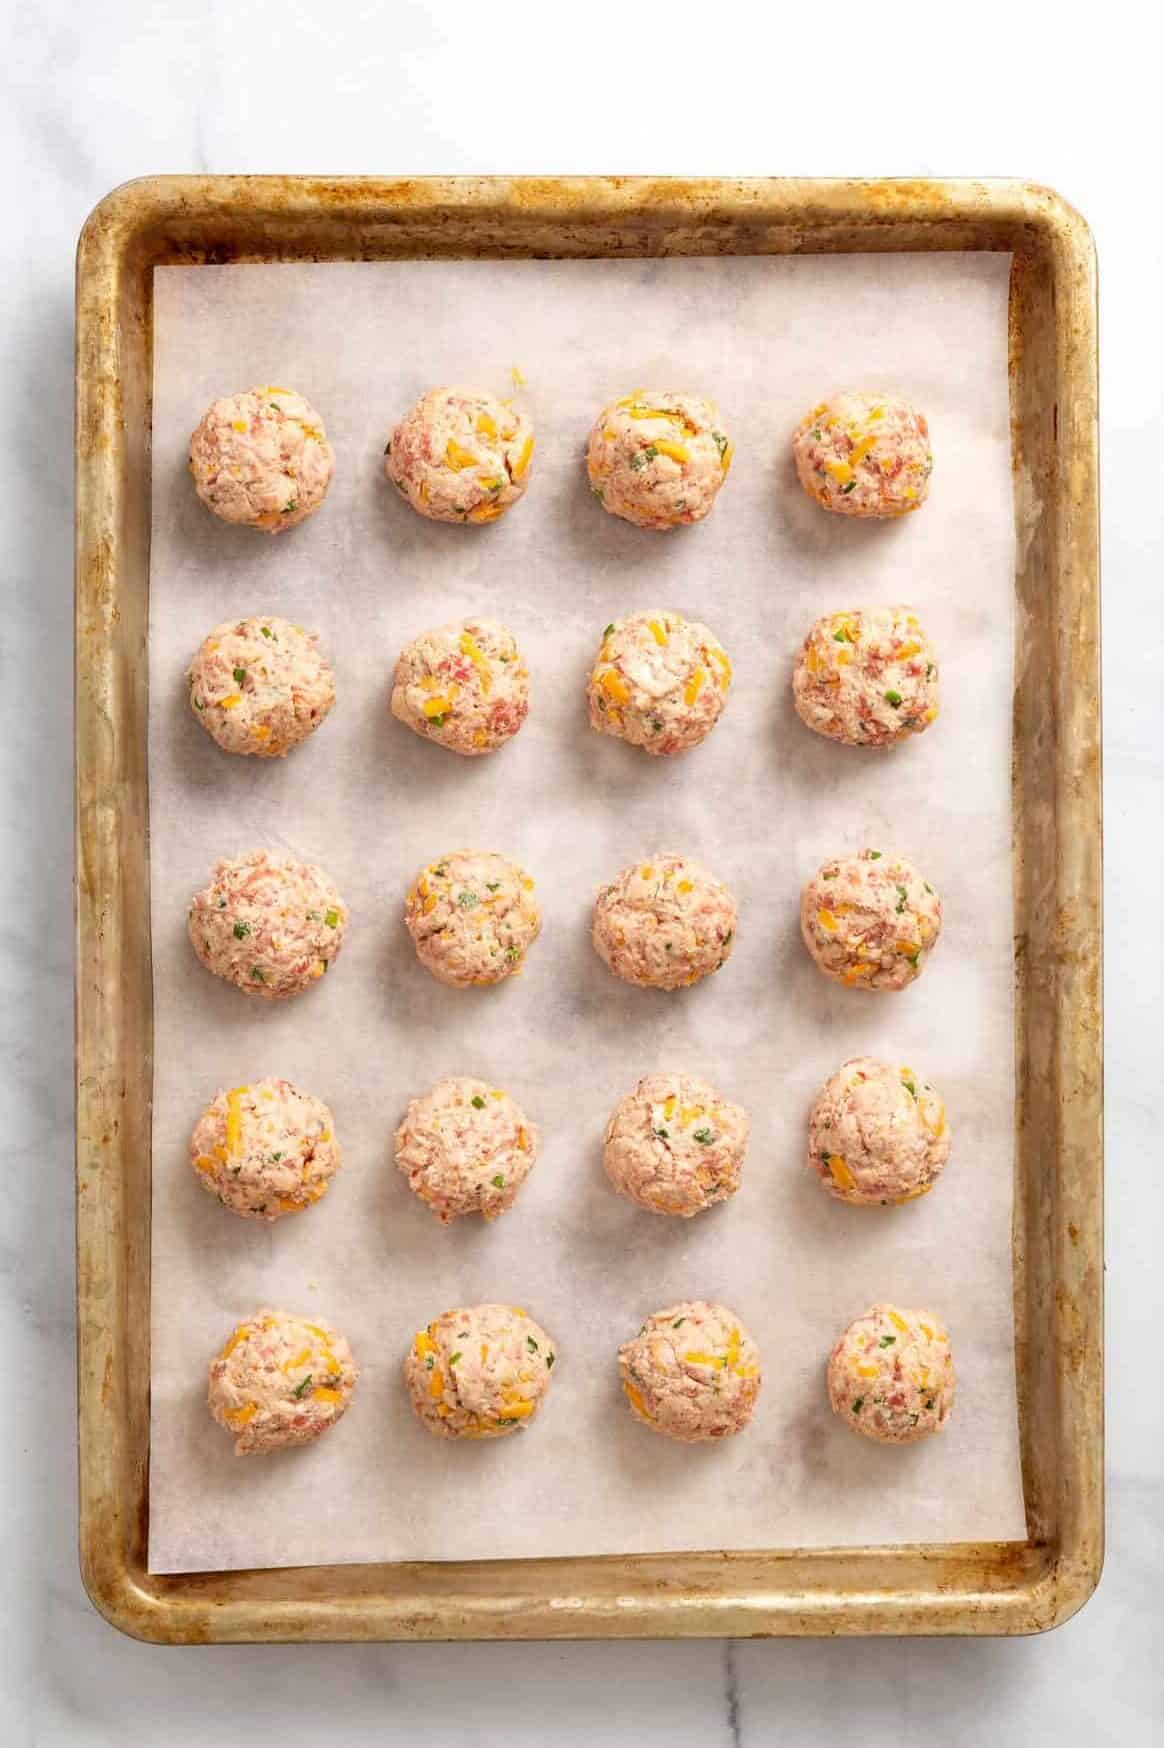 20 unbaked cream cheese sausage balls sitting on a parchment-lined baking sheet.